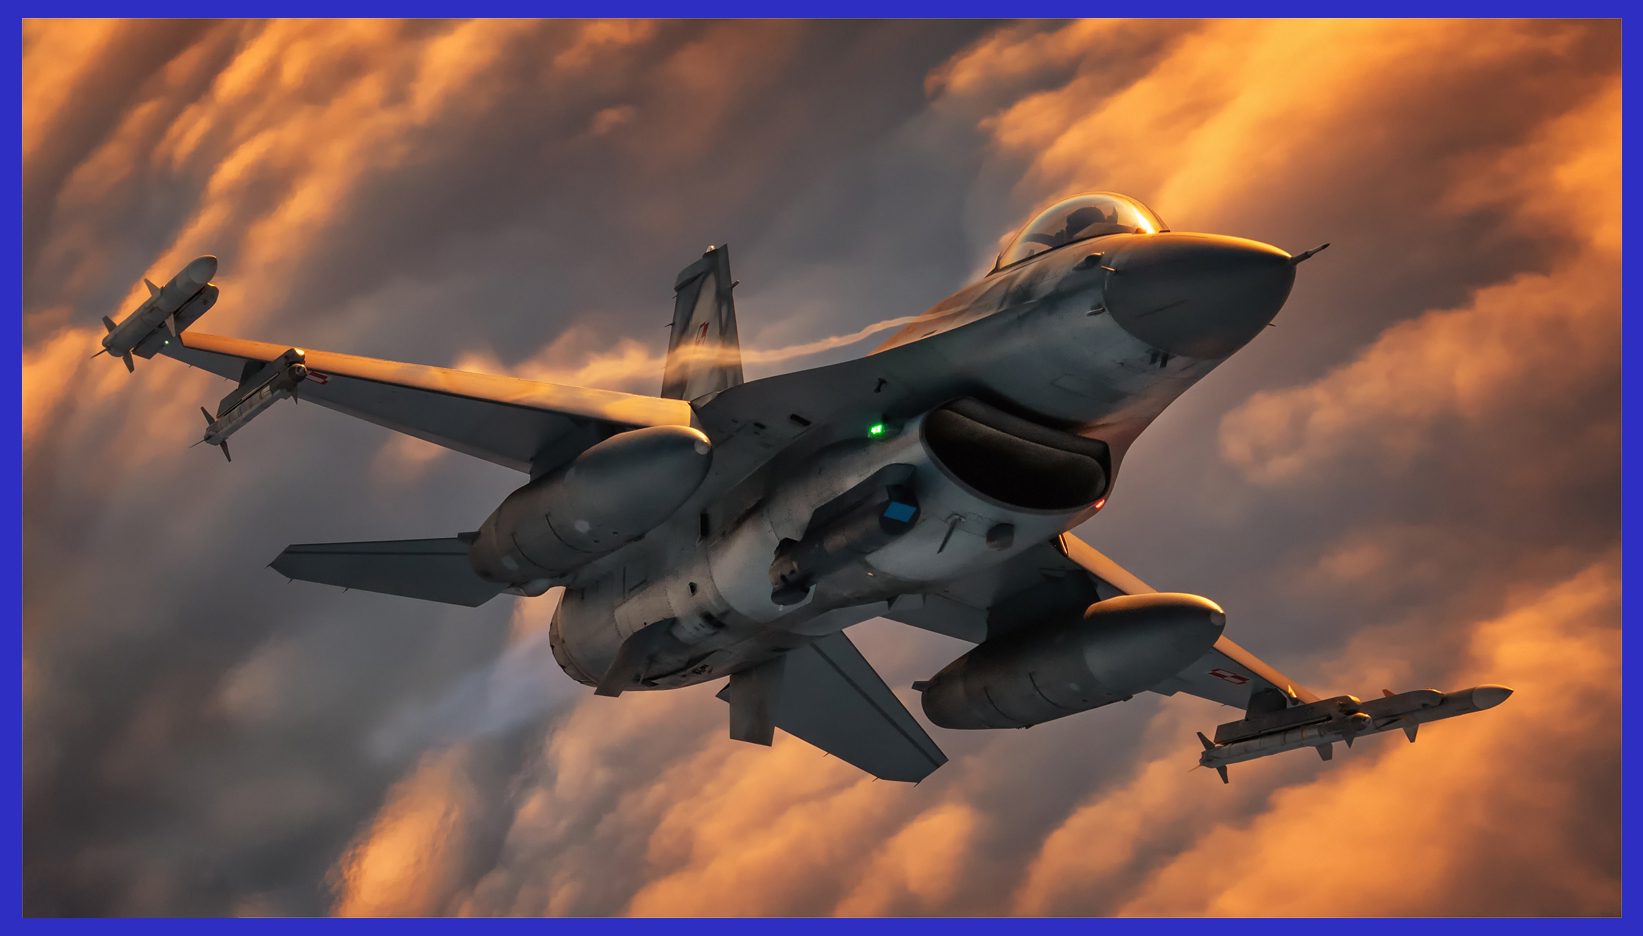 Photo Credit: Hesja Air-Art Photography / Let's Delve into the Best of the Lockheed F-16 in Detail